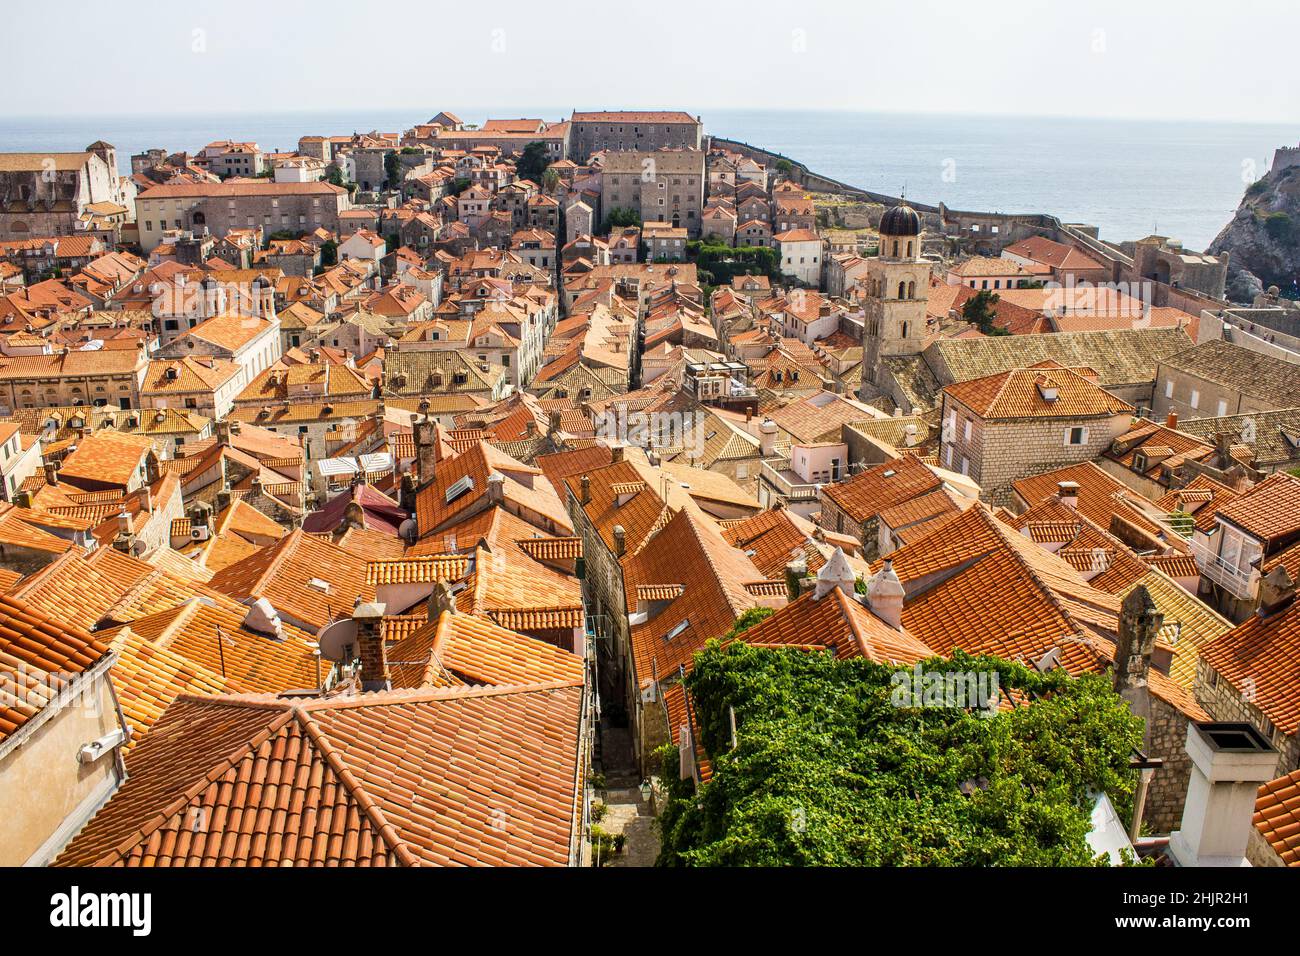 View of Traditional Colorful Rooftops and Franciscan Church and Monastery Bell Tower with Adriatic Sea in the Background Stock Photo